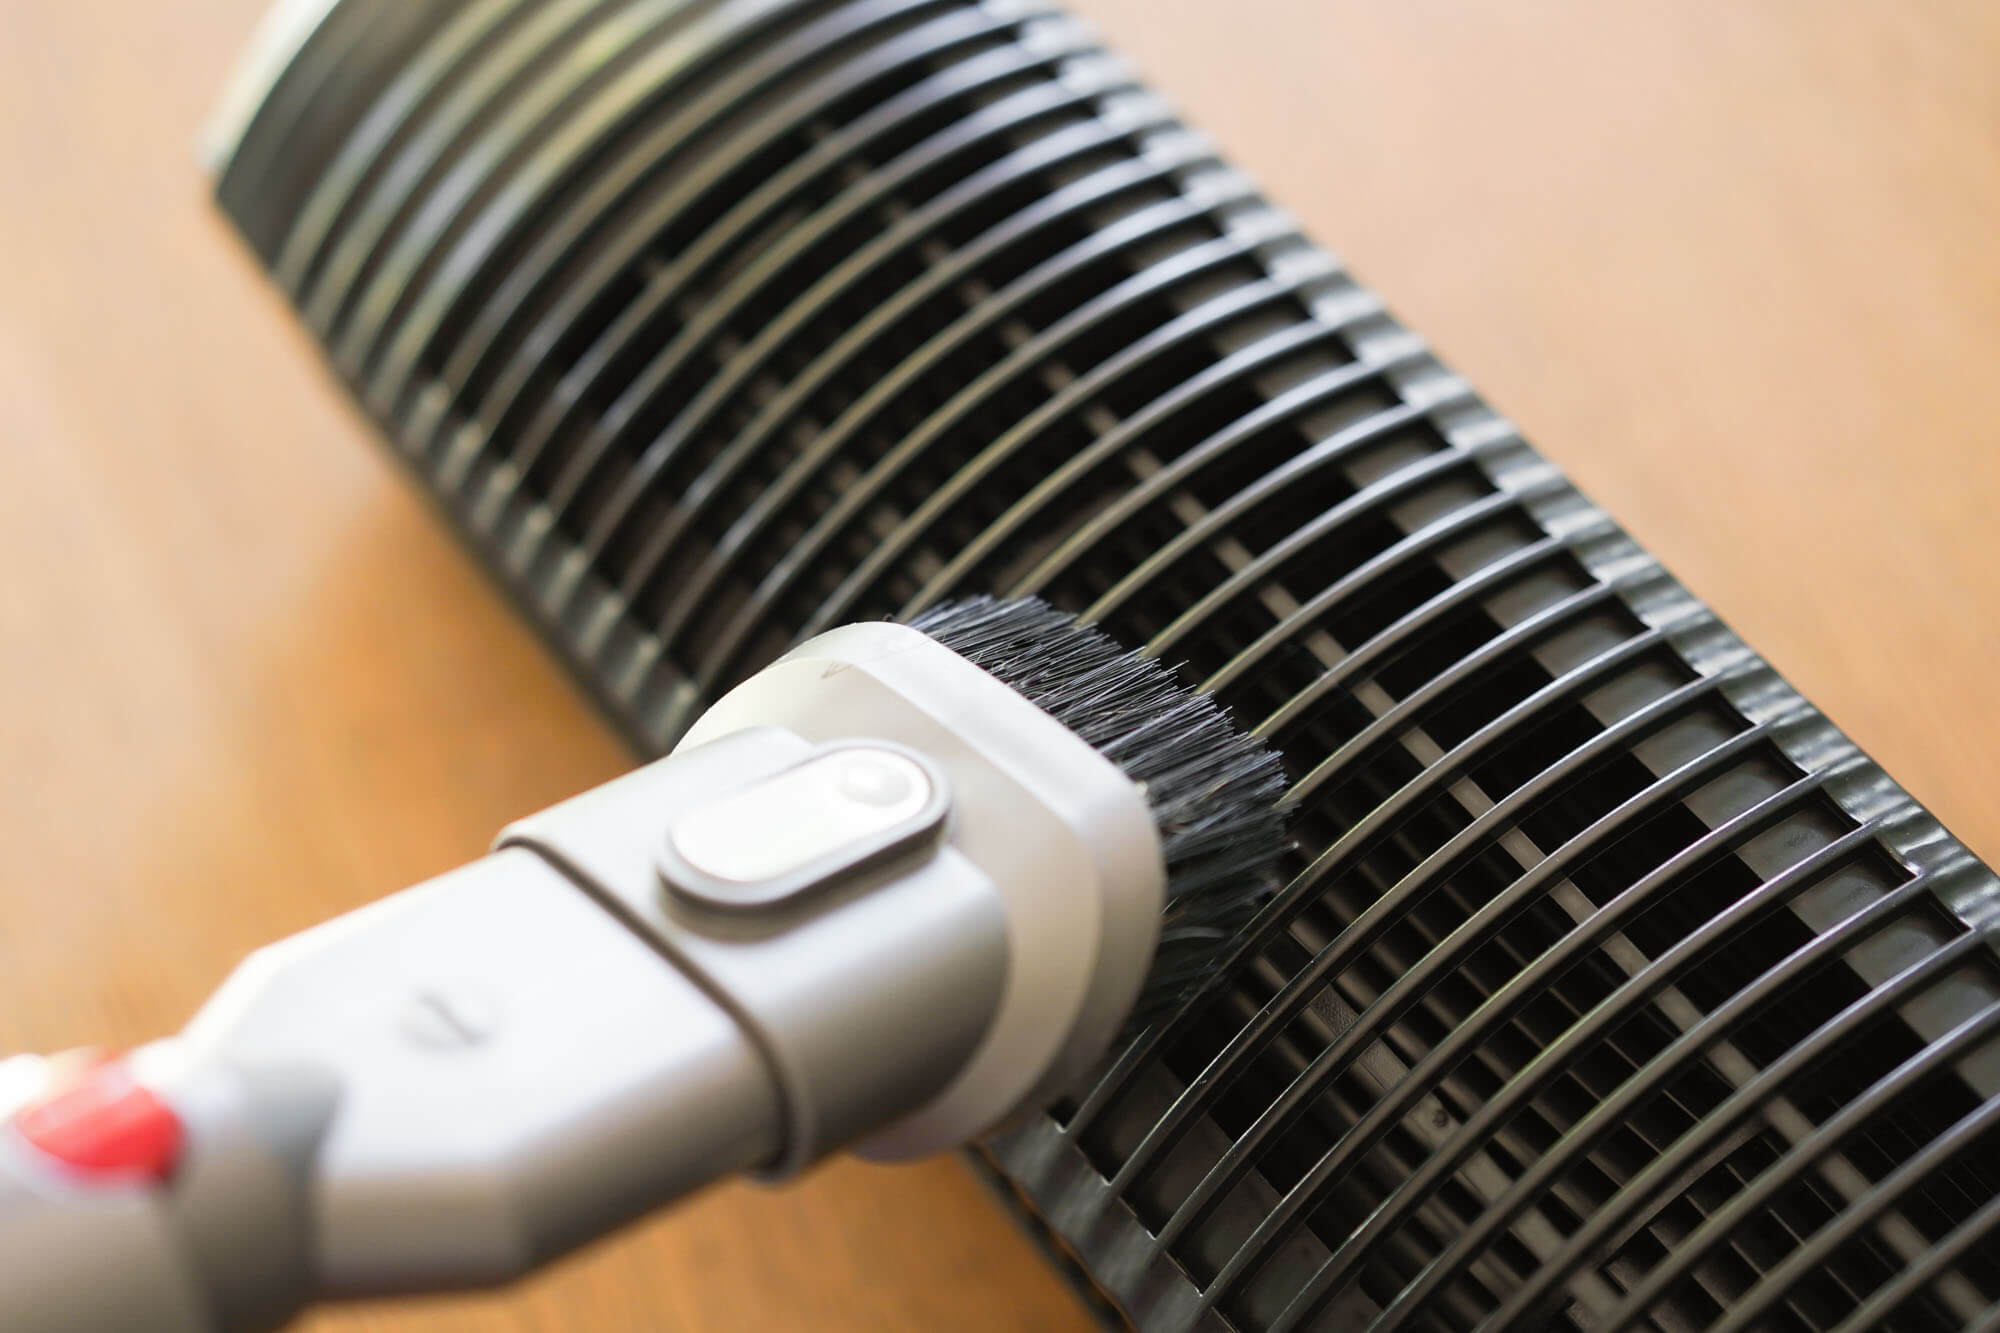 vacuuming fan vents with a brush attachment